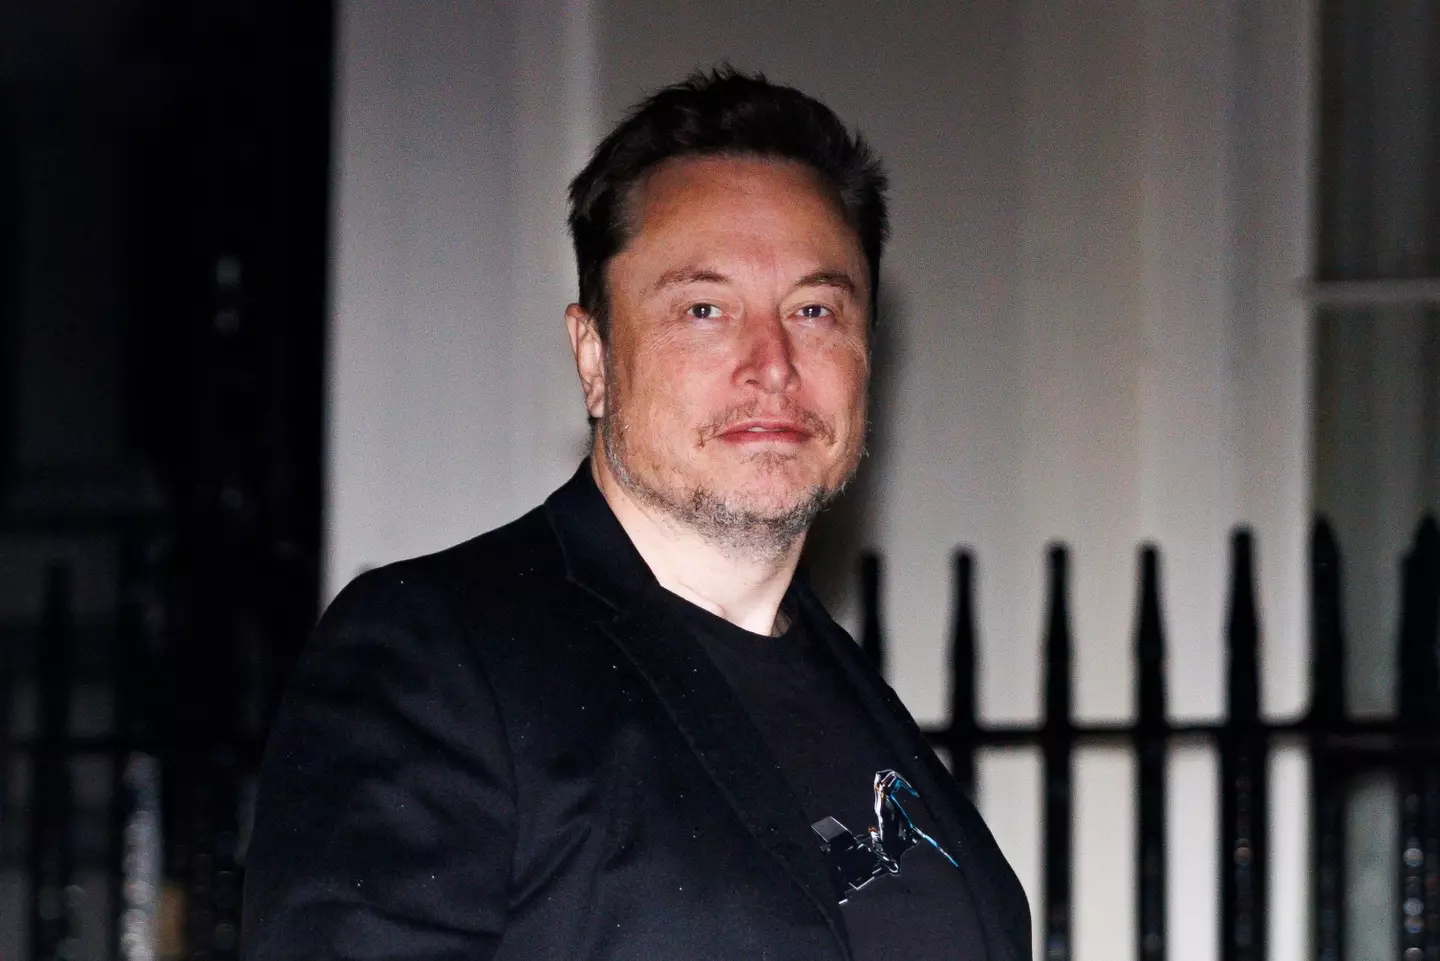 Elon Musk says he welcomed ‘critical feedback’ from users.